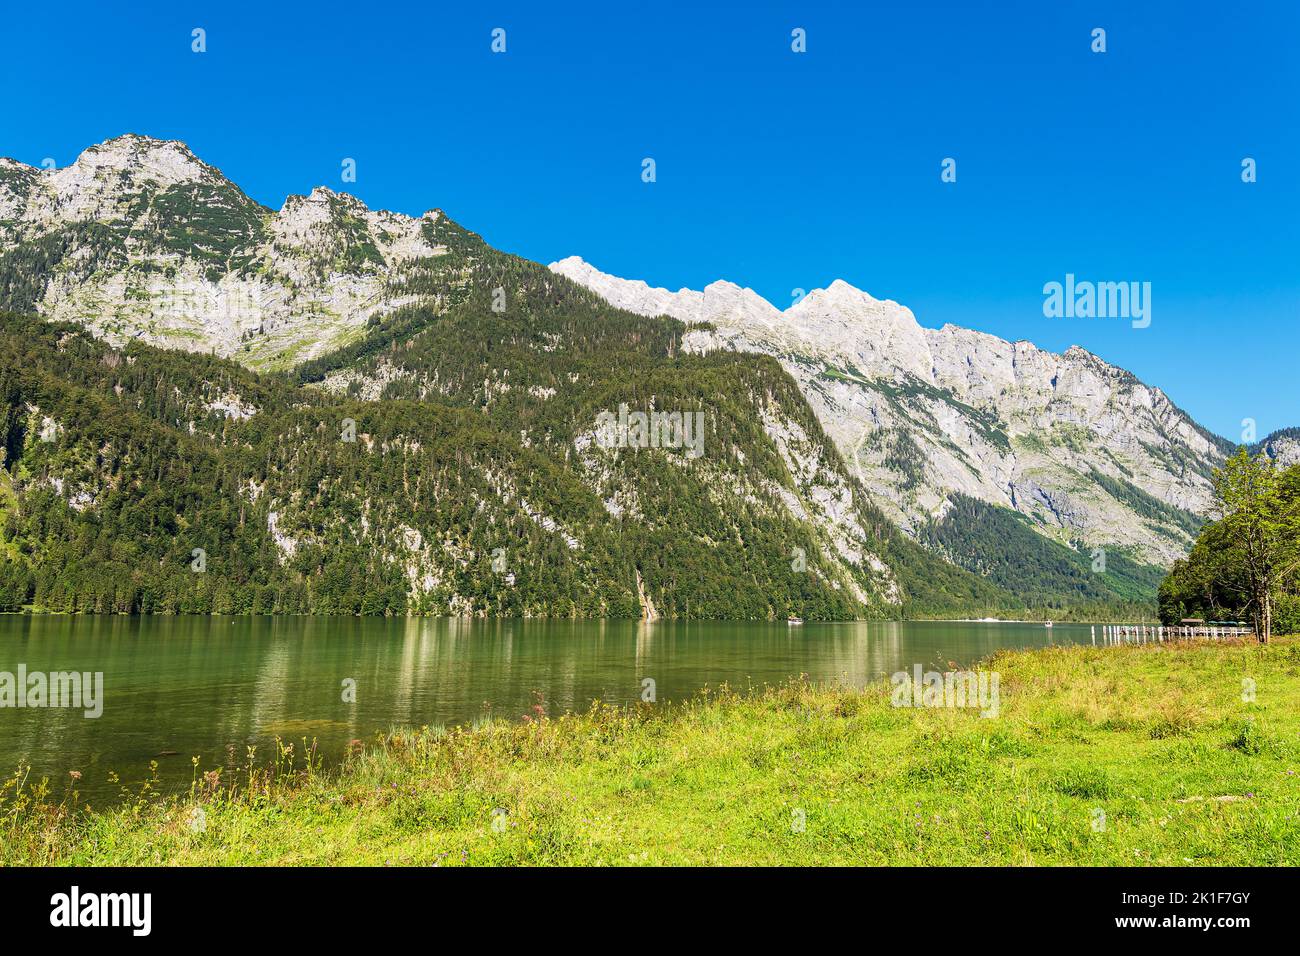 Lake Koenigssee with rocks and trees in the Berchtesgaden Alps, Germany. Stock Photo